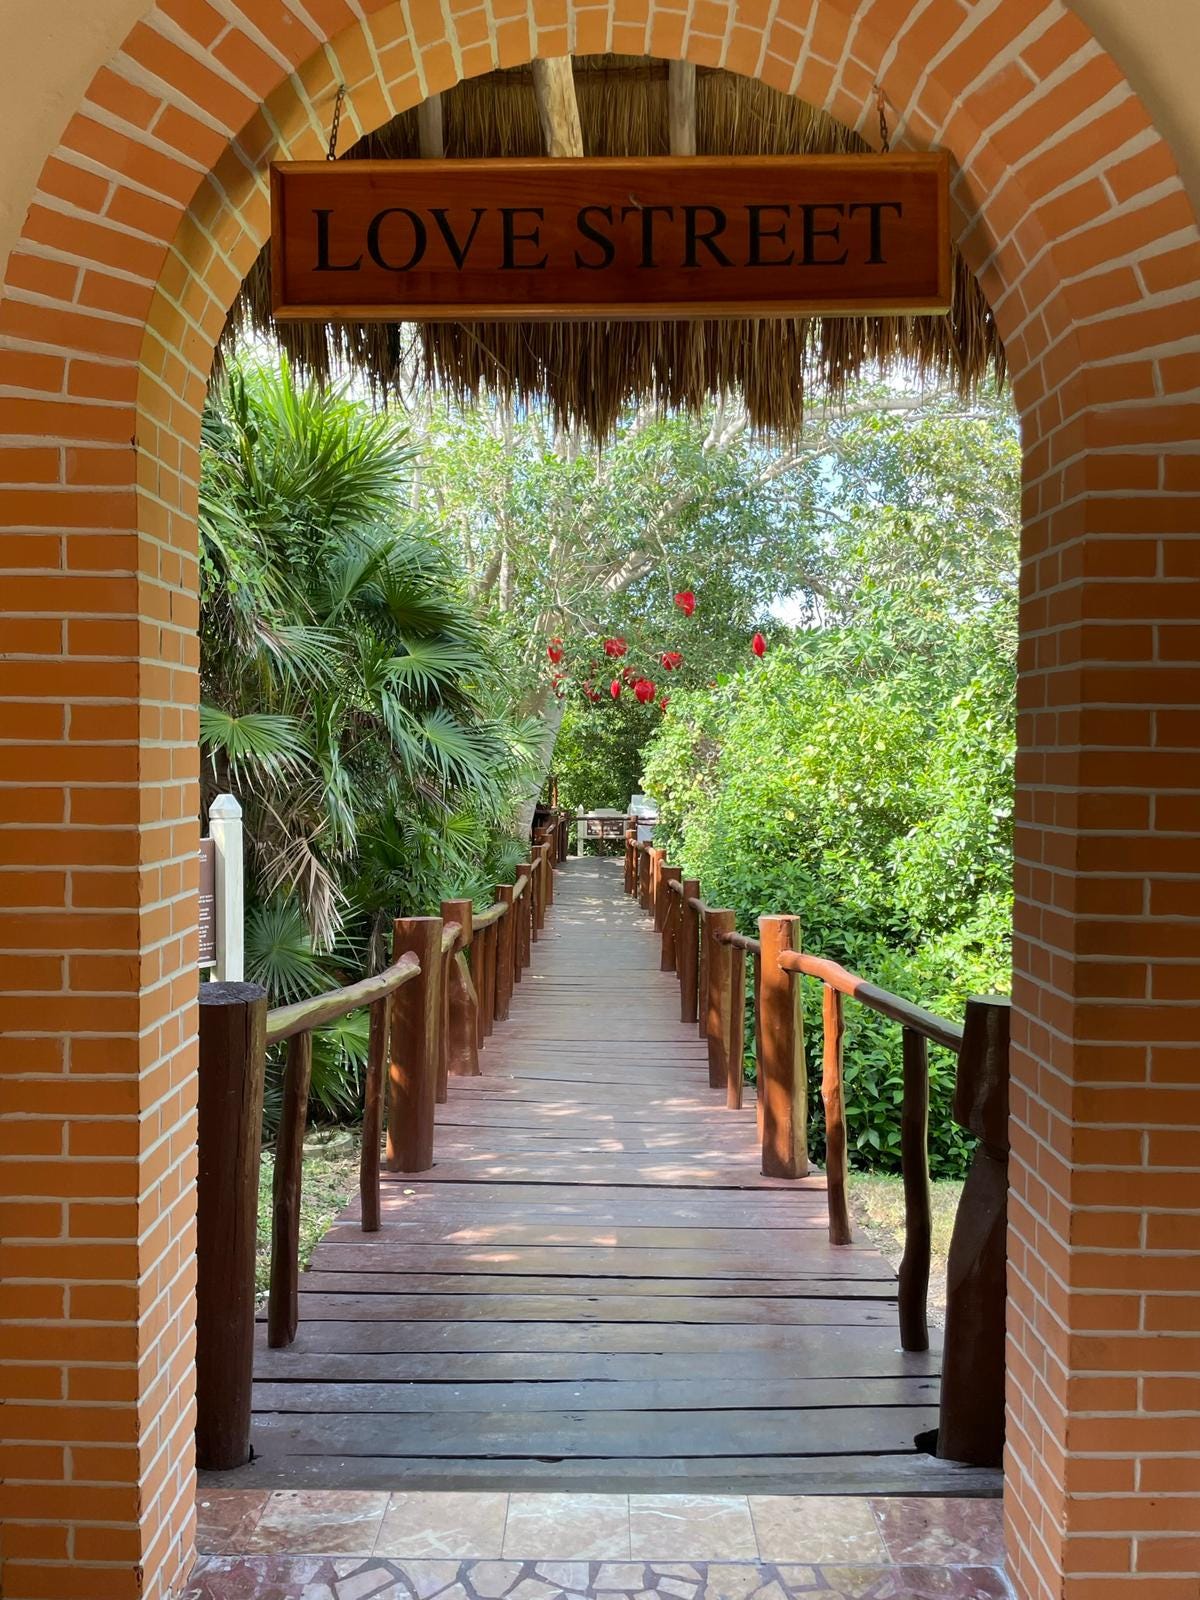 Archway into a lush garden with the sign above the door reading "Love Street".